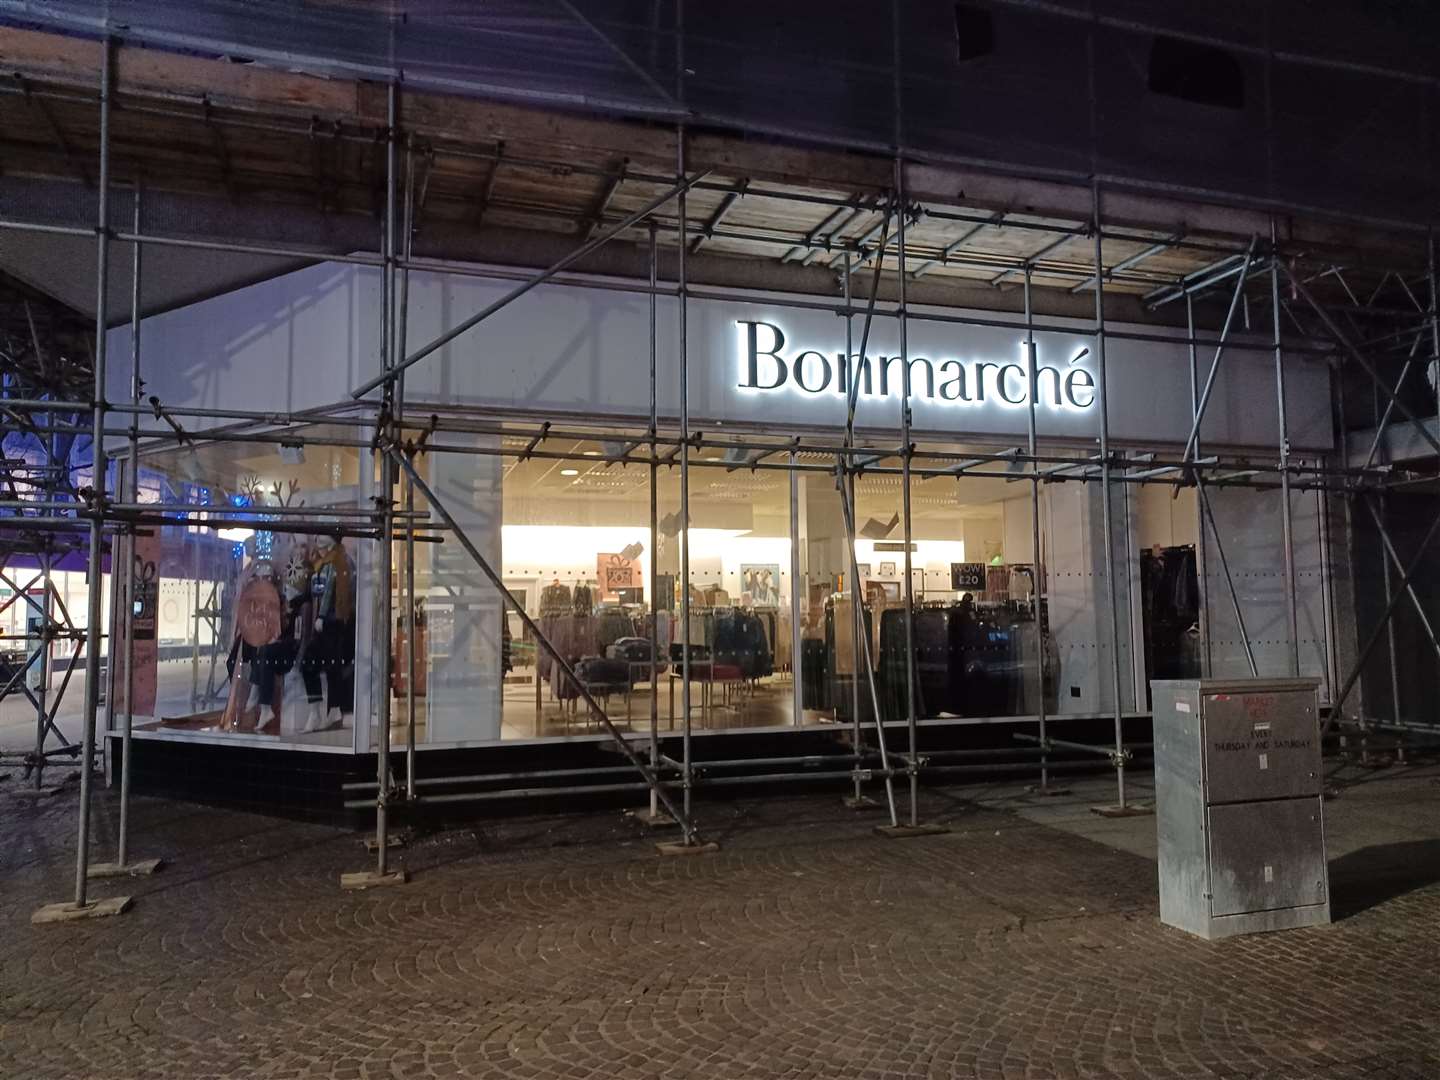 After seeing some of Folkestone's magnificent murals on the way to the restaurant, we were presented with Bonmarche, surrounding by scaffolding in Guildhall Street